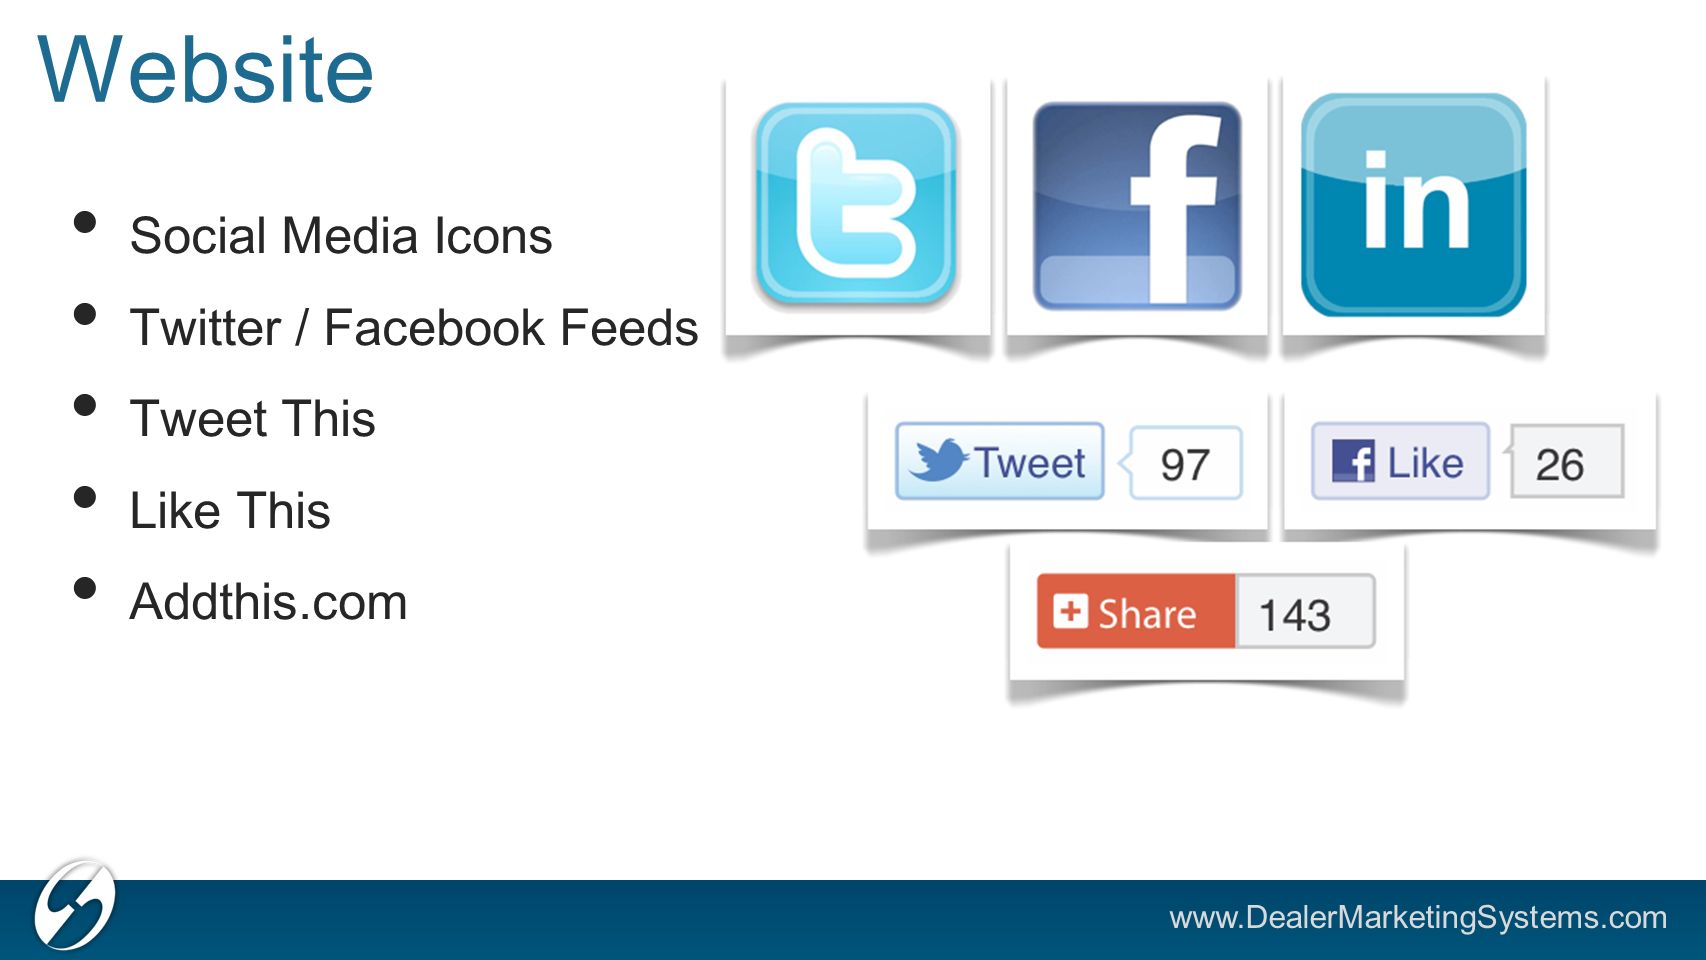 Website Social Media Icons Twitter / Facebook Feeds Tweet This Like This Addthis.com